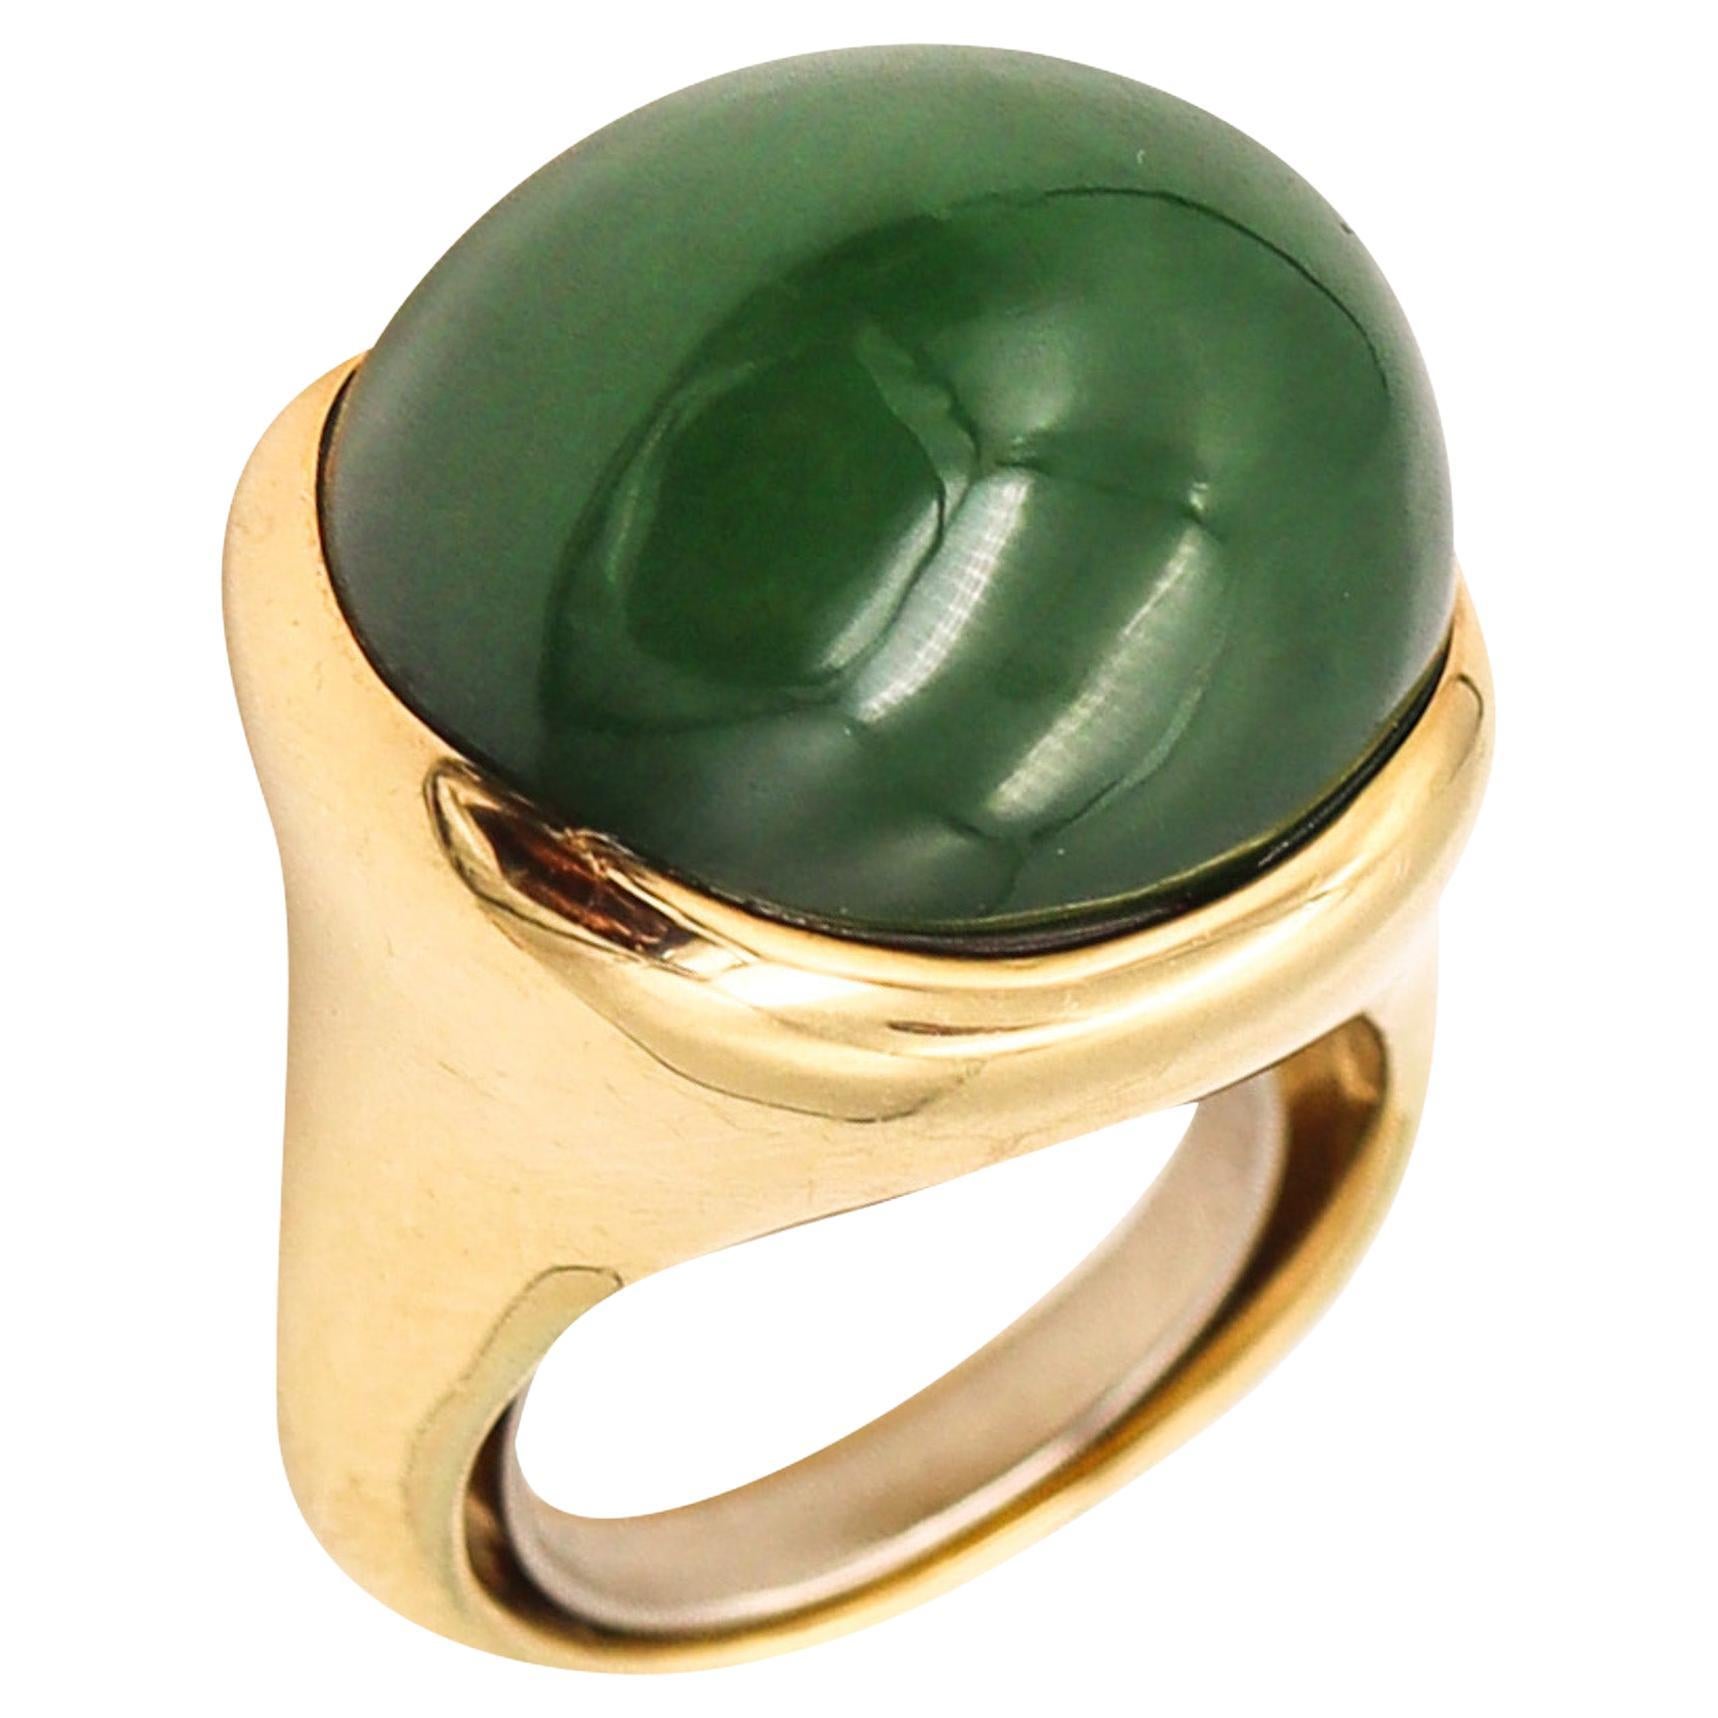 Tiffany & Co. Elsa Peretti Sculptural Ring in 18k Gold with 26.64cts Nephrite